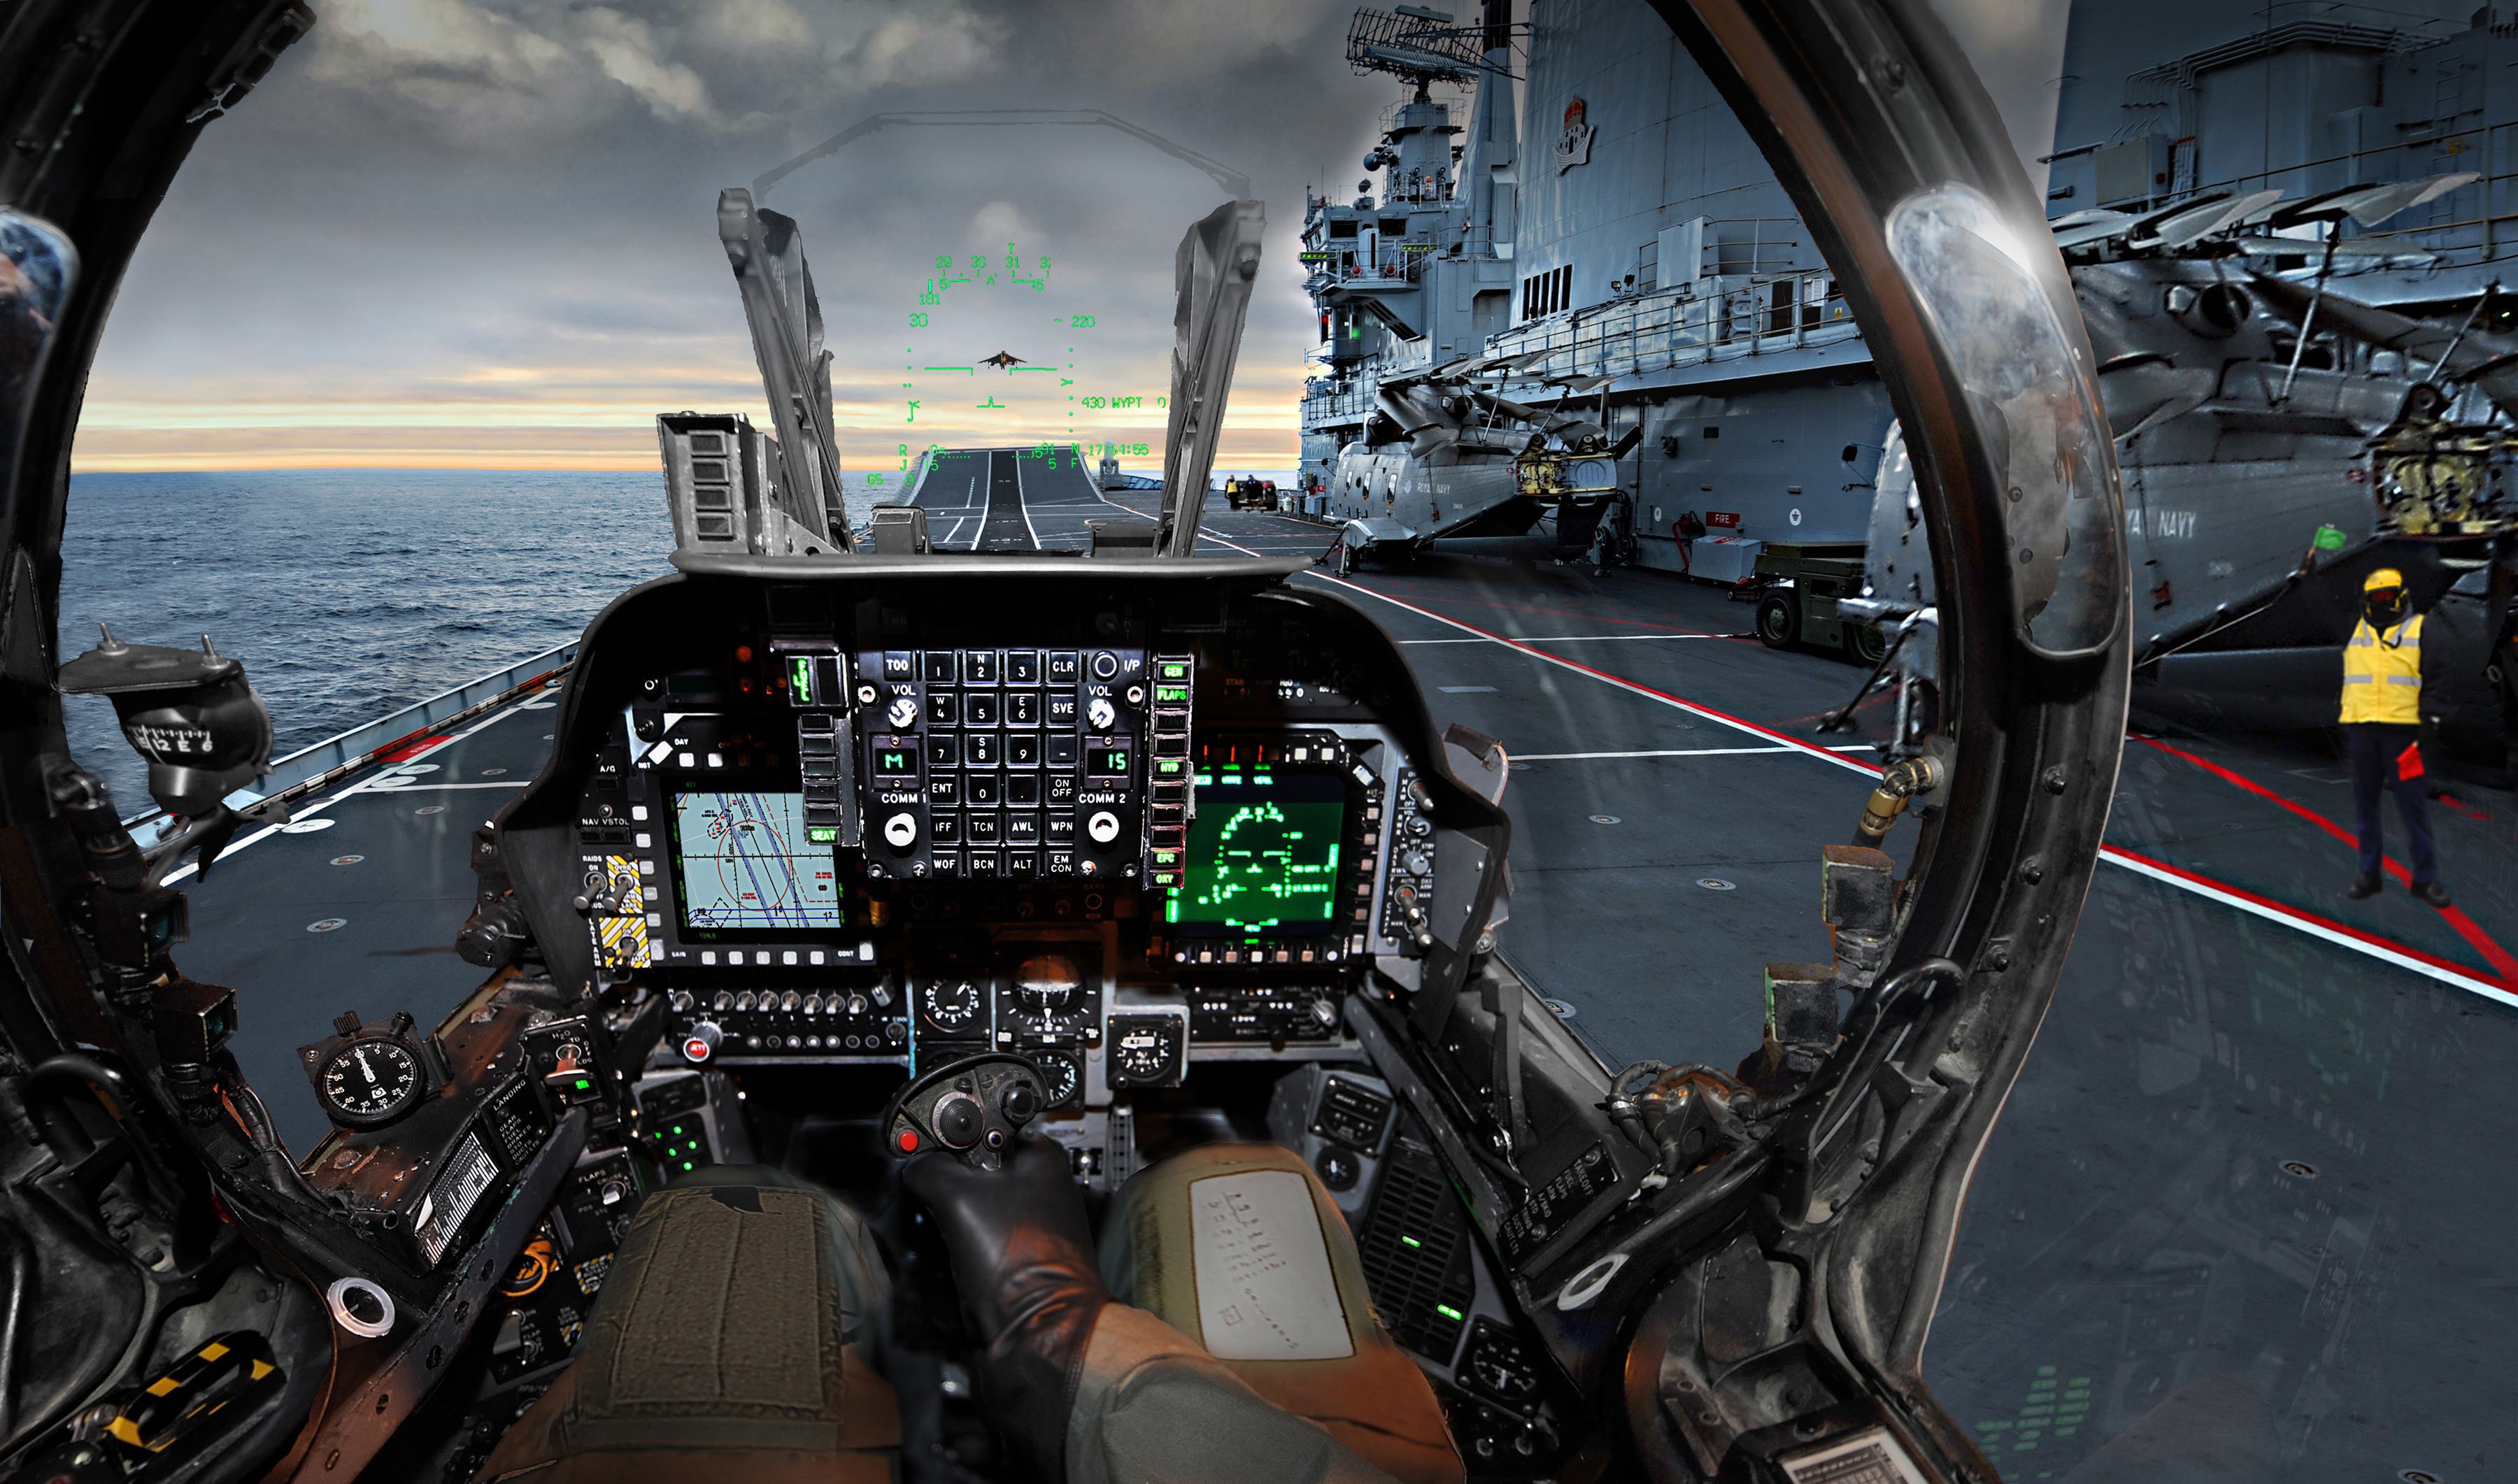 General 3600x2122 cockpit helicopters aircraft military aircraft AV-8B Harrier II vehicle POV Royal Navy Harrier American aircraft British aircraft military military vehicle water interior technology pilot sky clouds